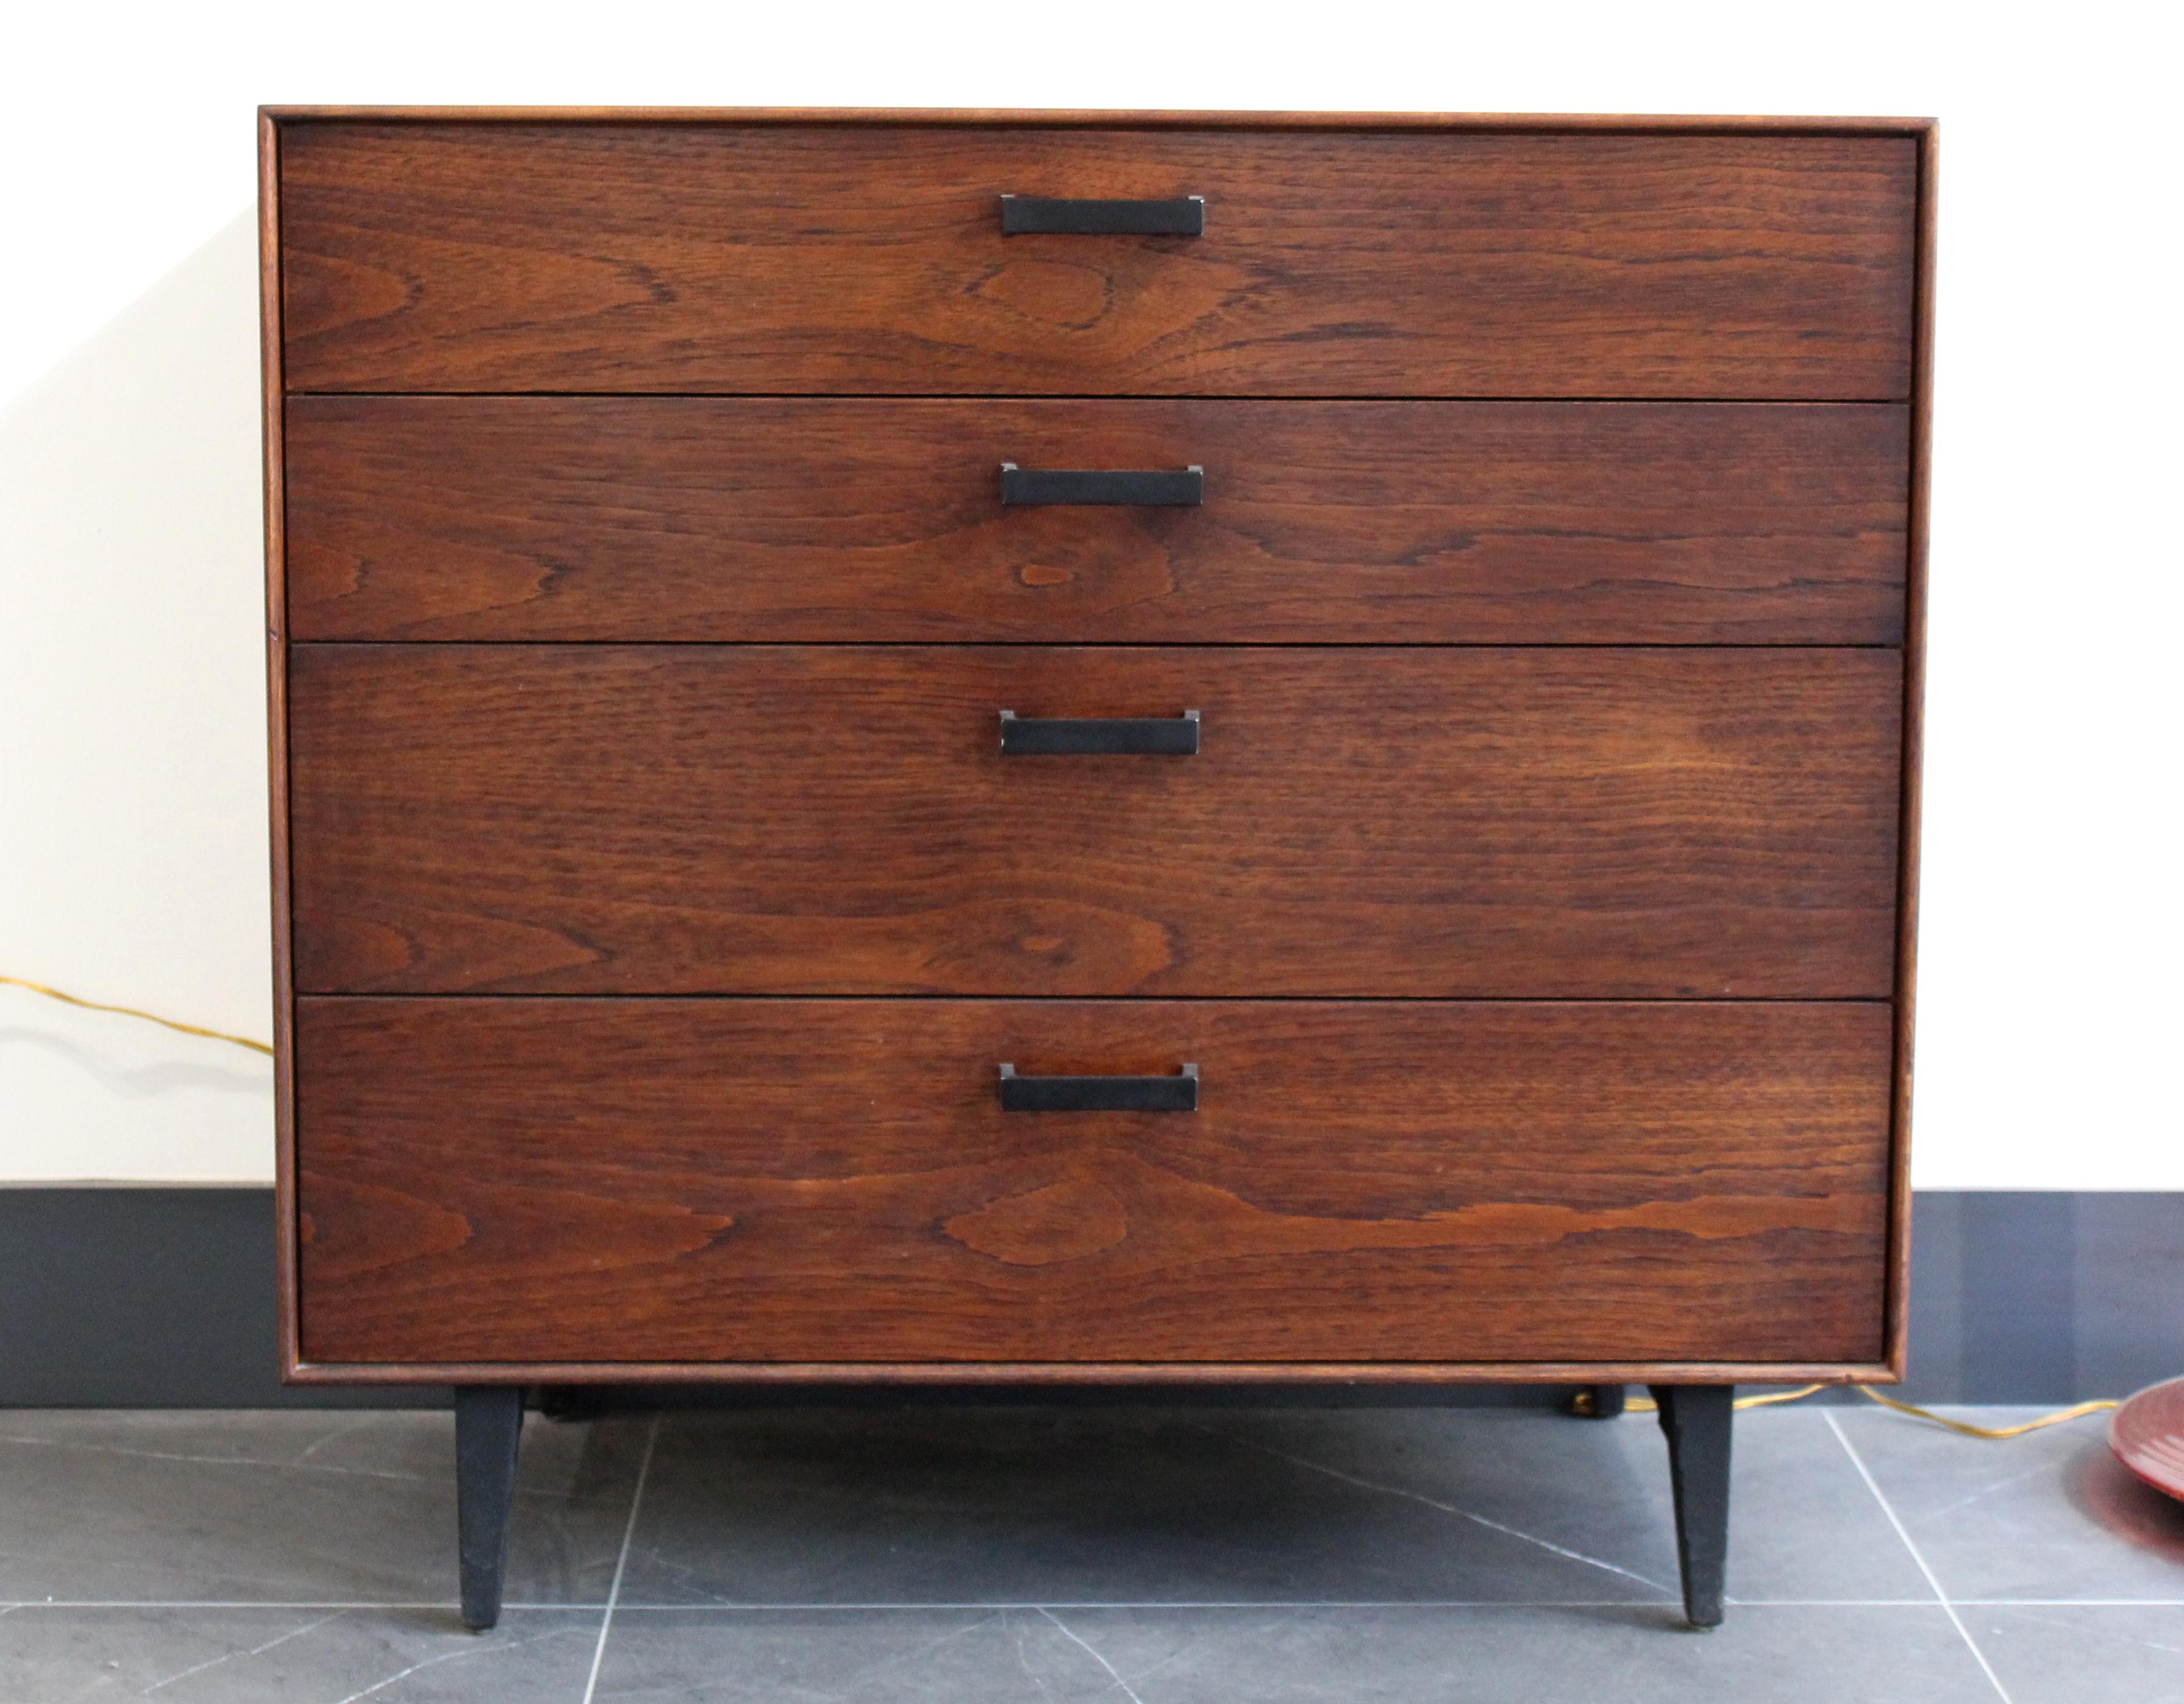 Mid-Century Modern dressers designed by George Nelson for Herman Miller in the mid-20th century. With four drawers and tapered legs. In great vintage condition with age-appropriate wear.